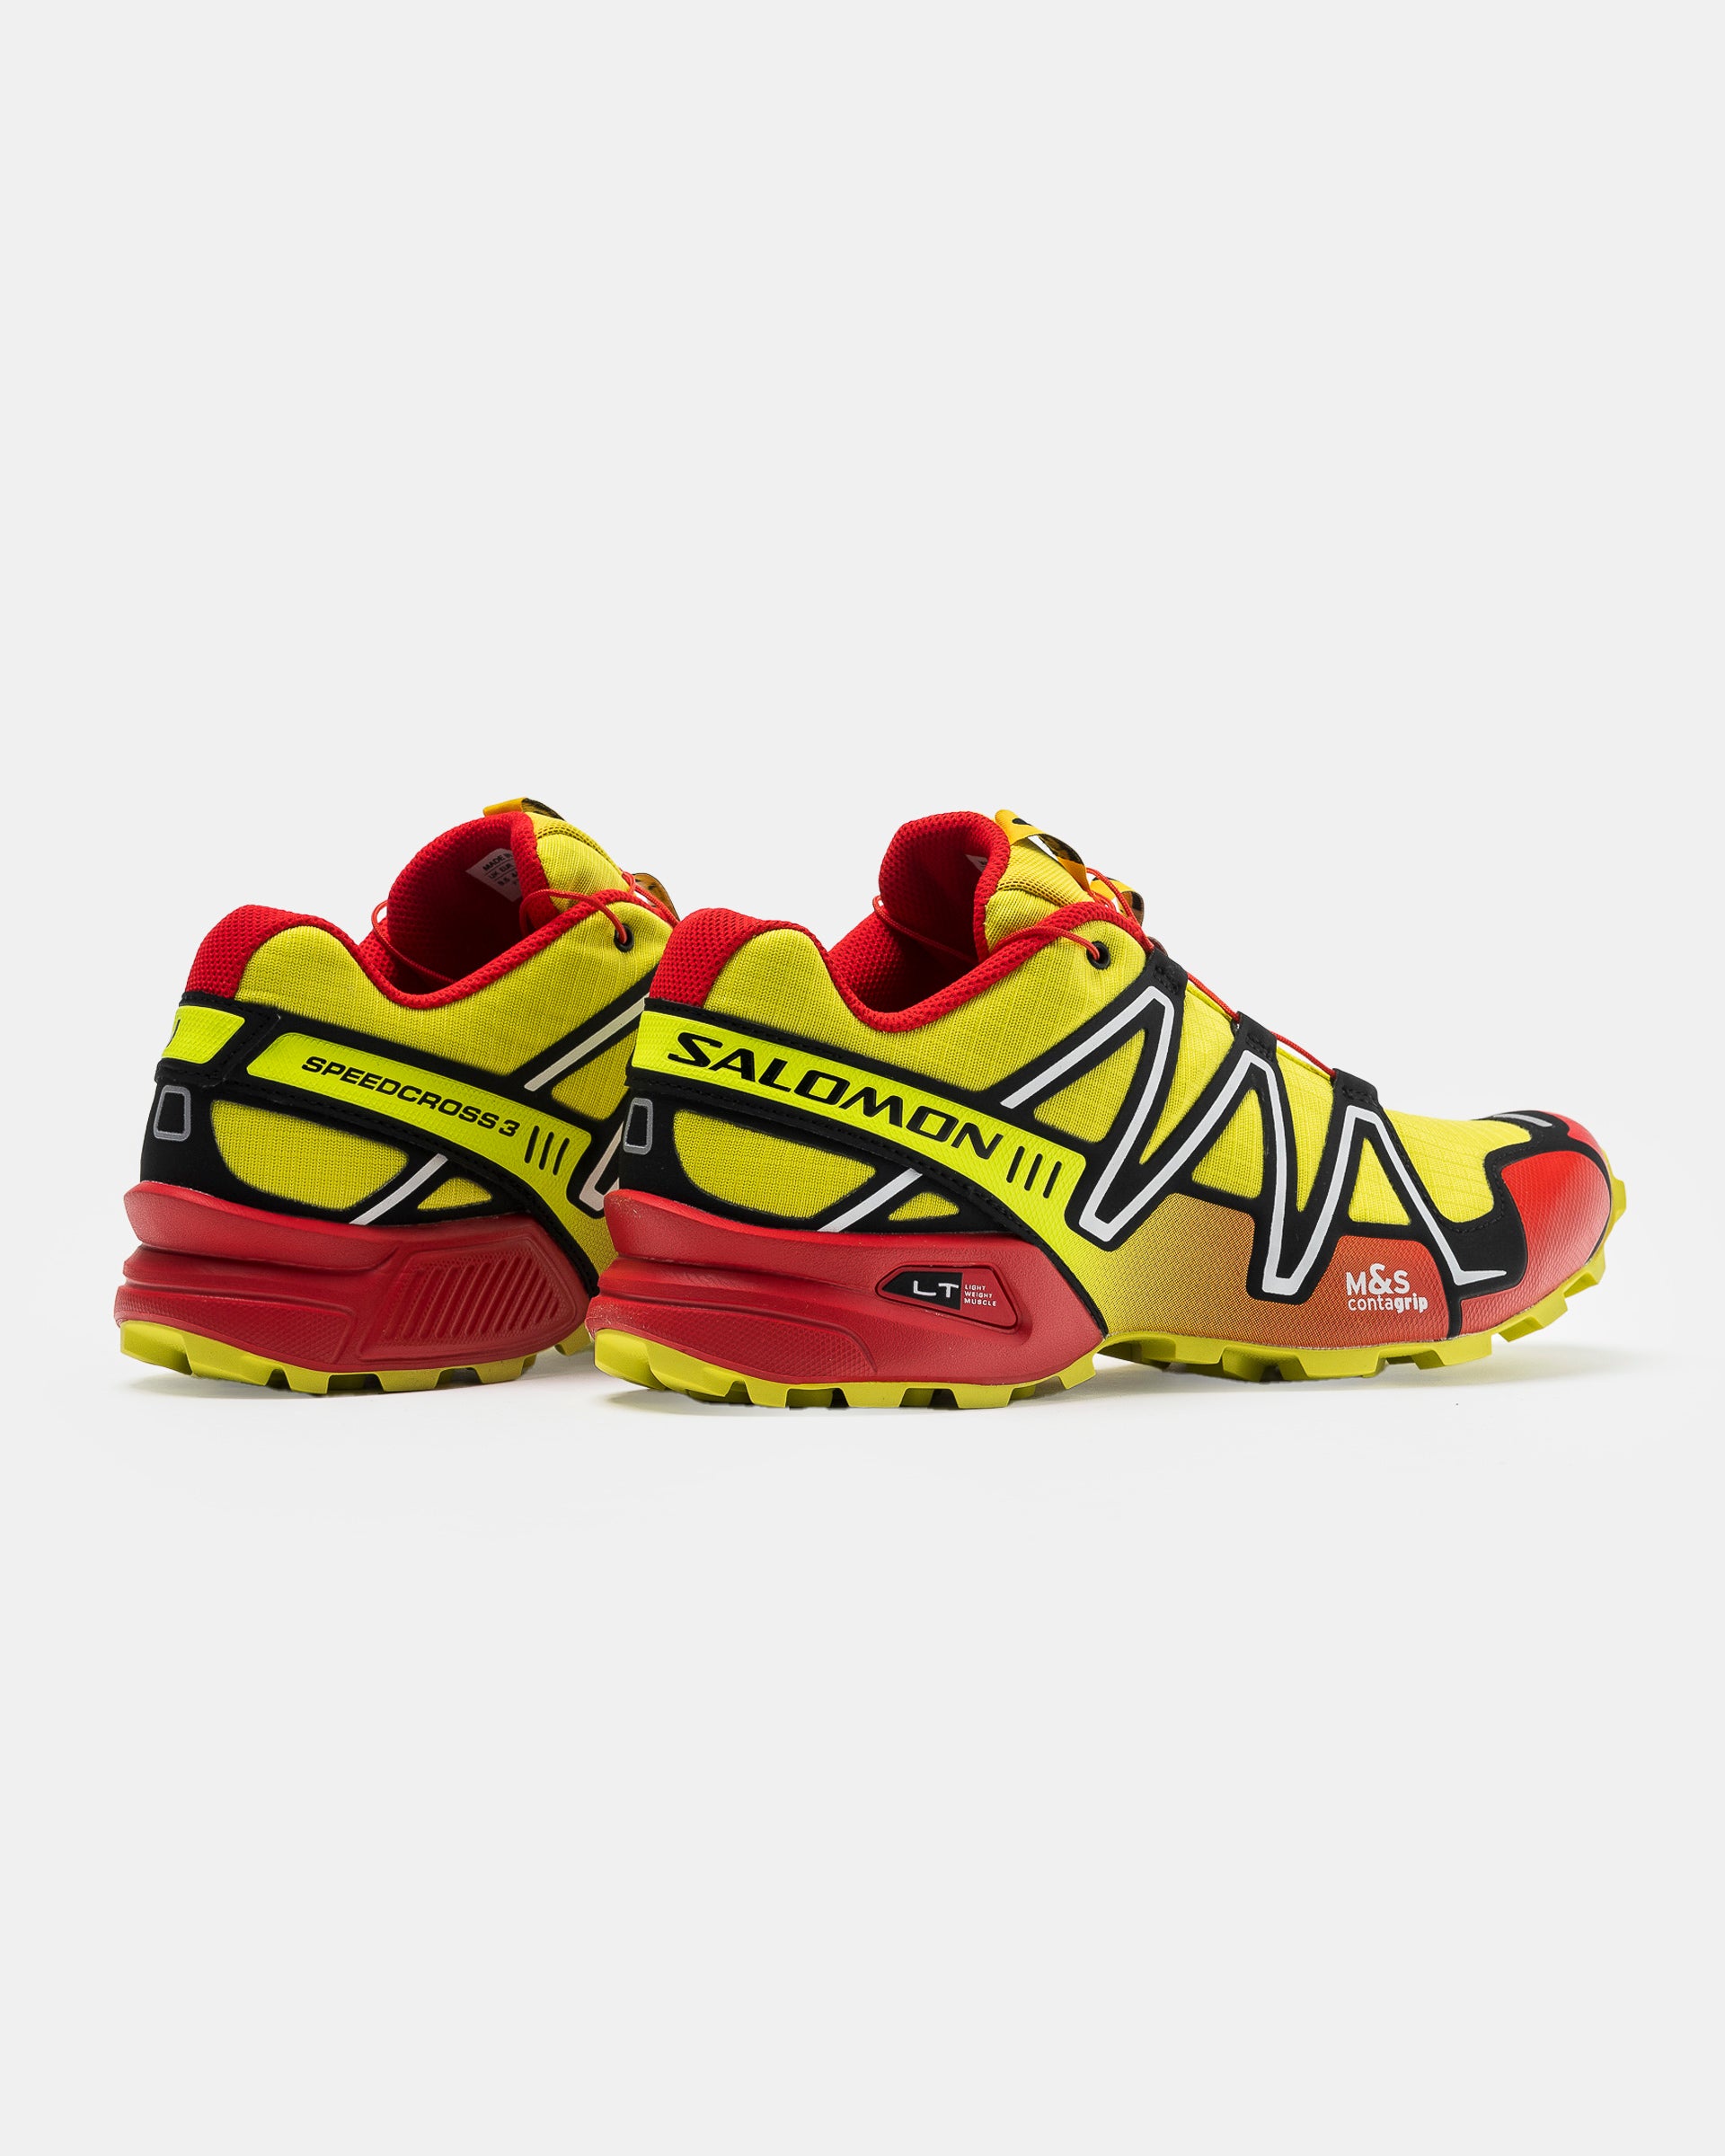 Salomon RX SPEEDCROSS 3 in Sulphur, High Risk Red, and Black on the white background.